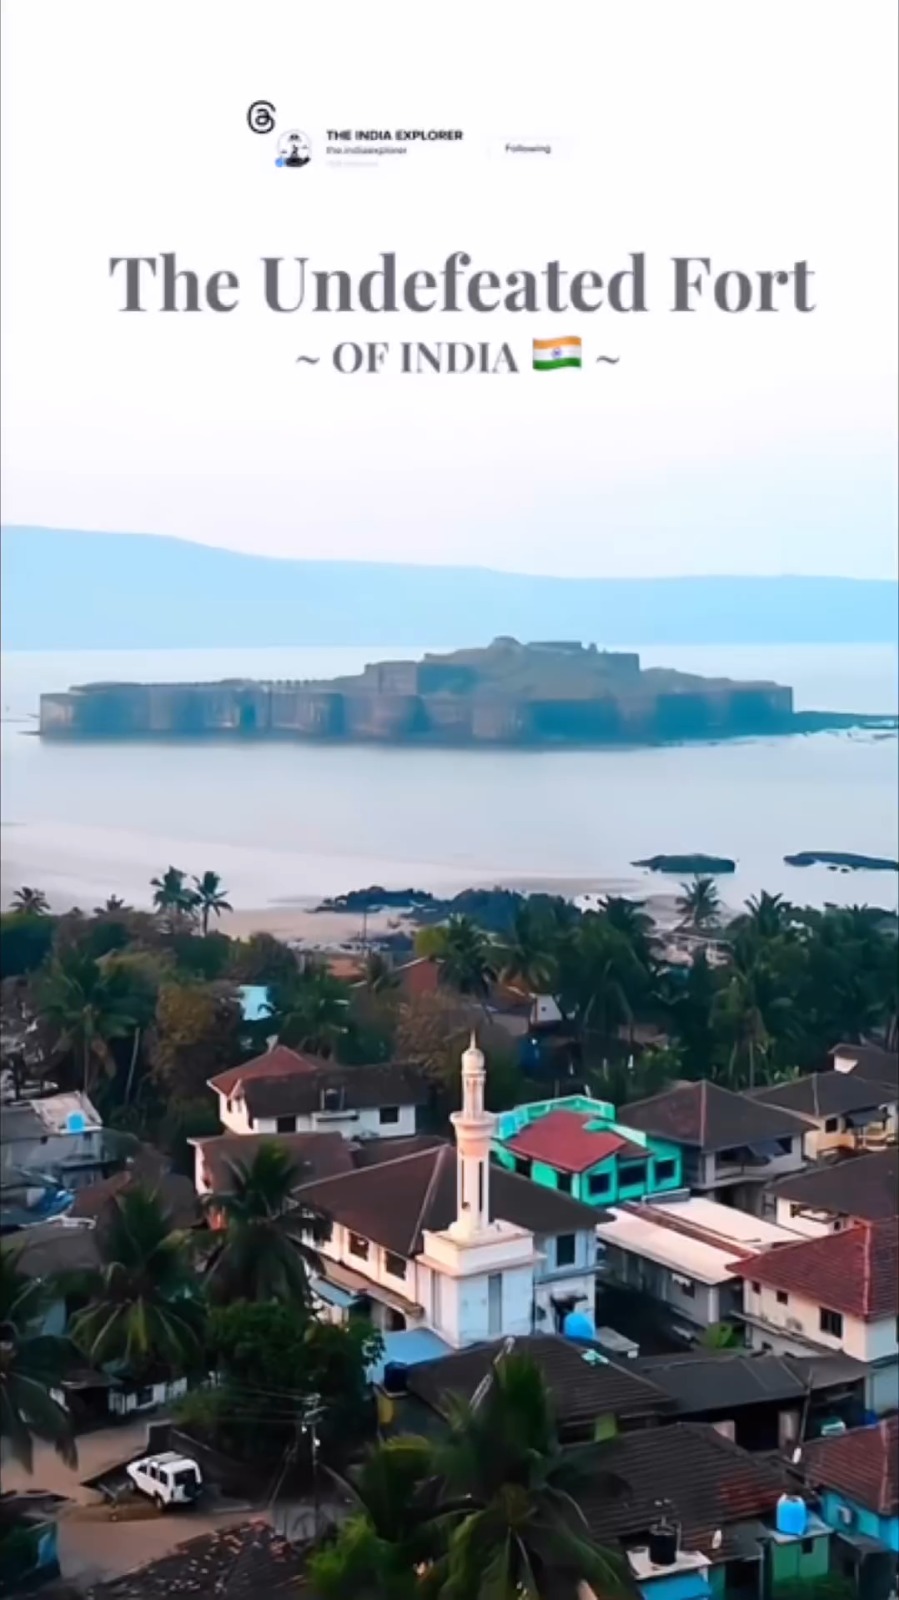 📍The Undefeated Fort of India! Murud-Janjira is the only fort that has NEVER been conquered even after many attempts! It is considered one of the most dangerous forts in the country and you must visit it!